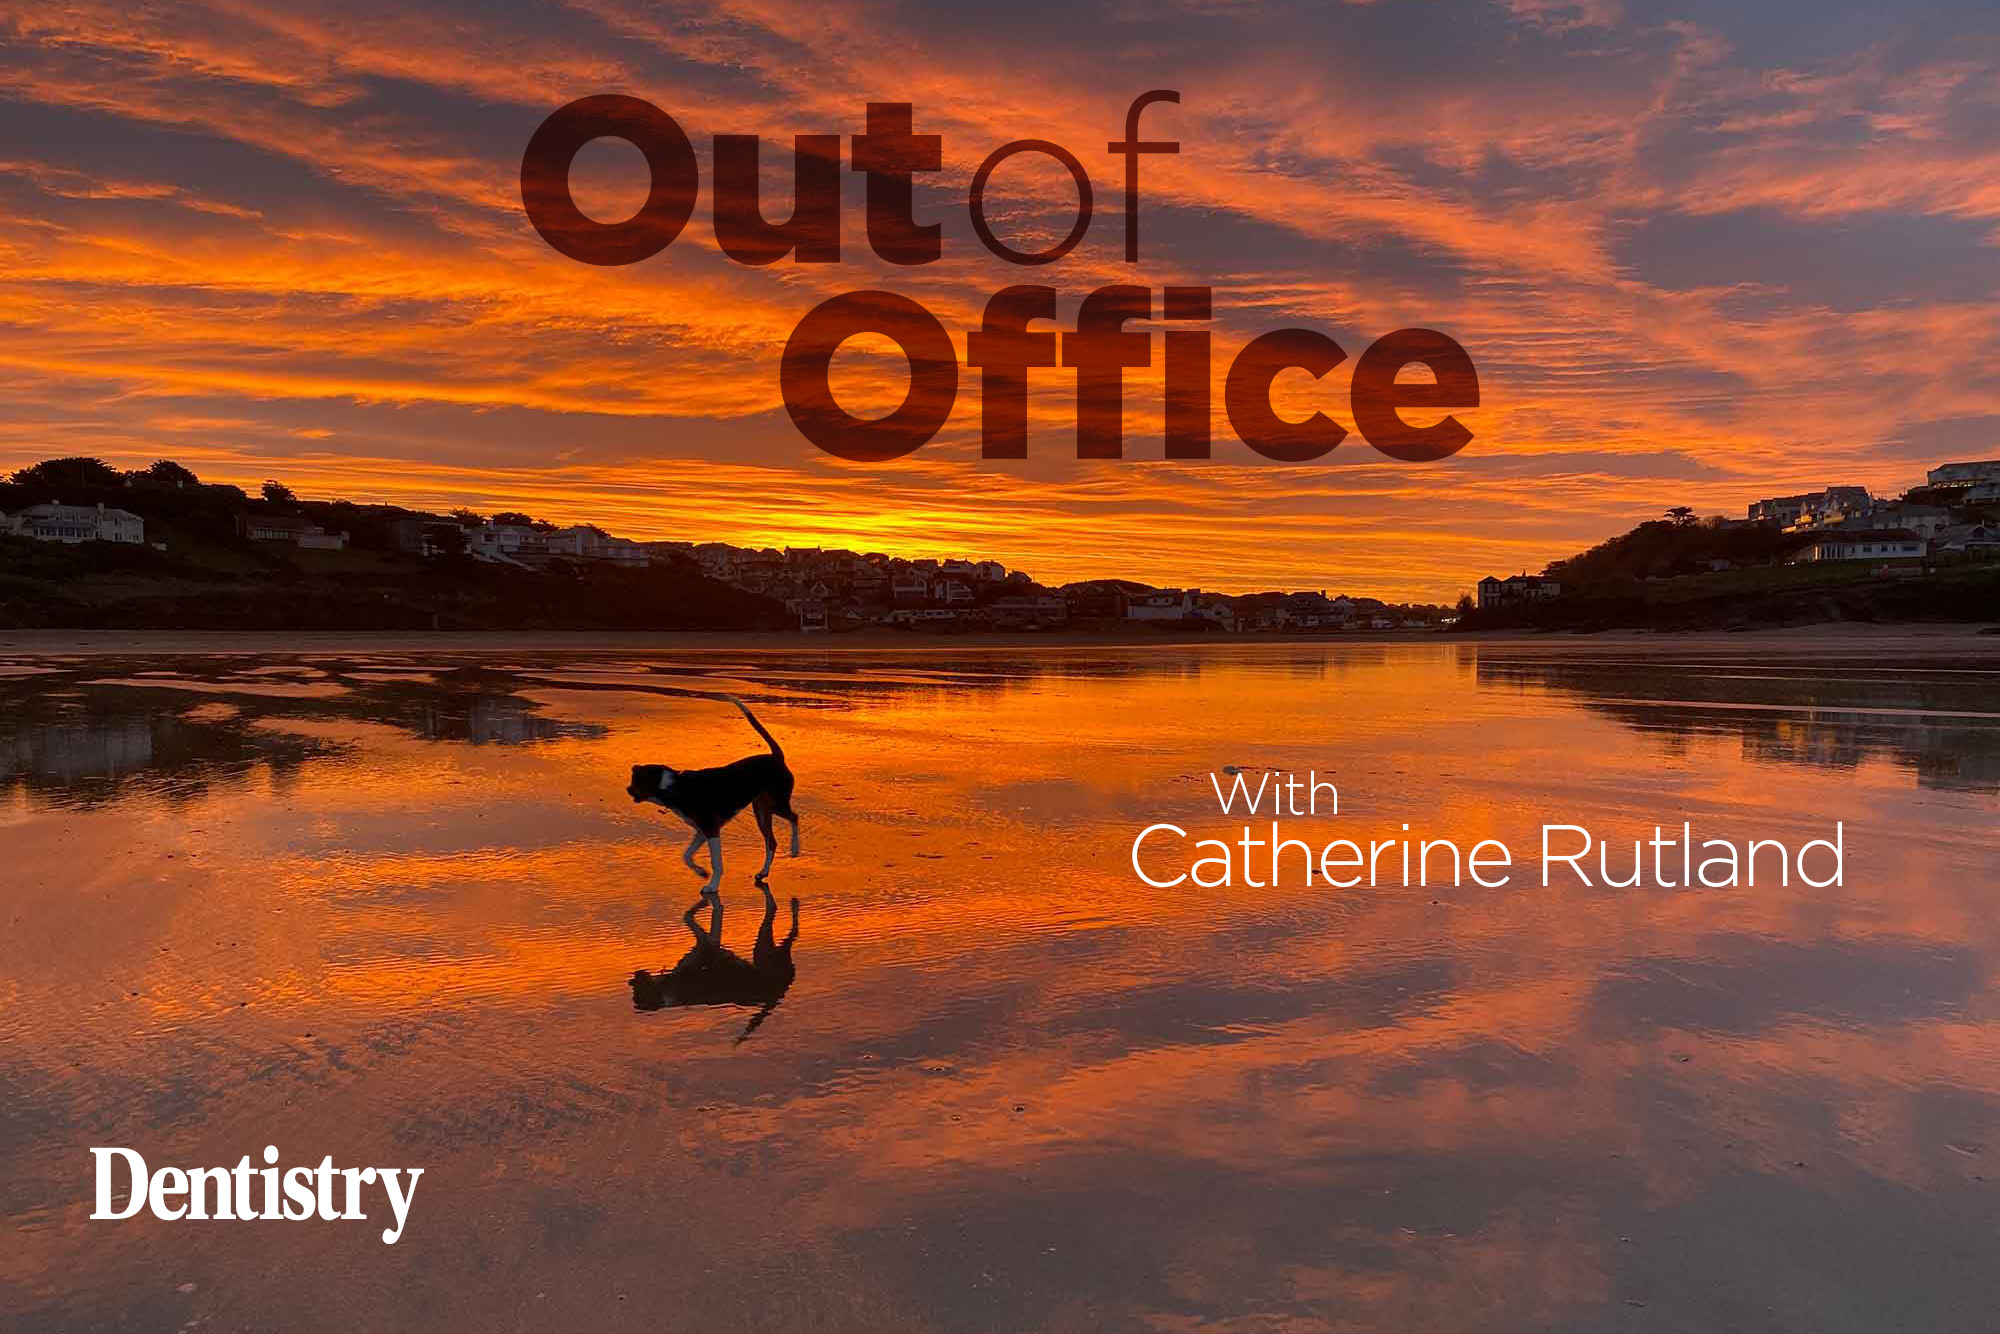 Catherine Rutland talks to us about her passion for outdoor swimming and how she has travelled to 57 countries, many before she was 14